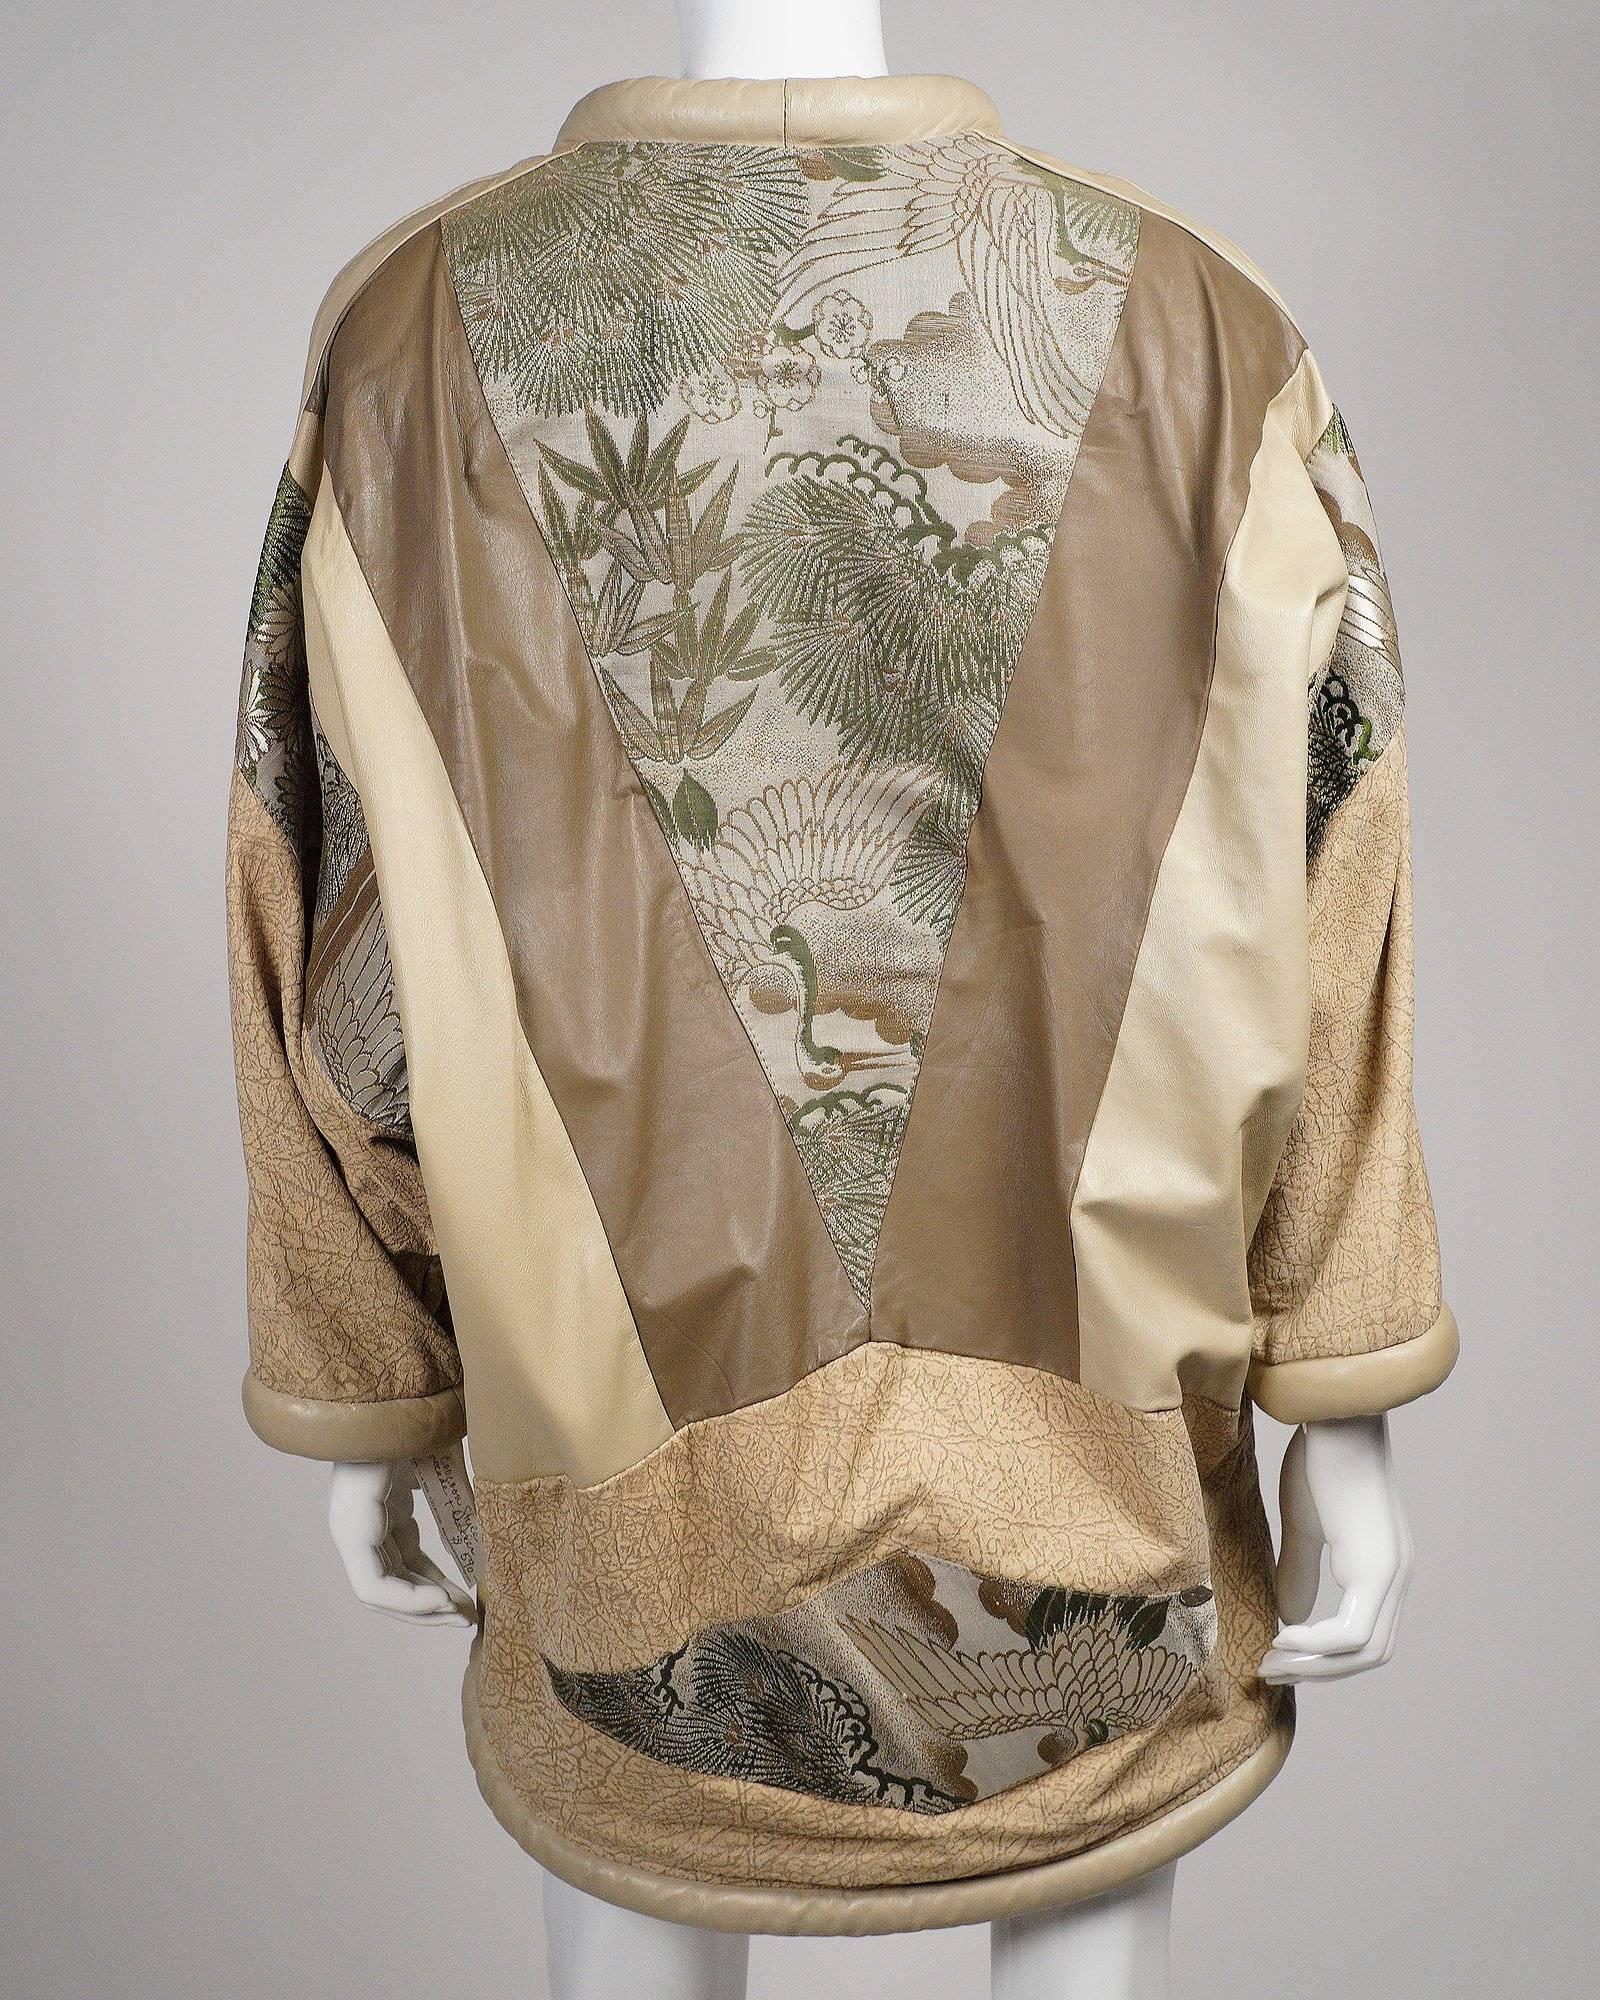 Opulent Japanese Style cocoon coat in leather with a silk brocade lining. Hand embroidered crane and bamboo leafs strips adorn the front with a single closure clasp. 